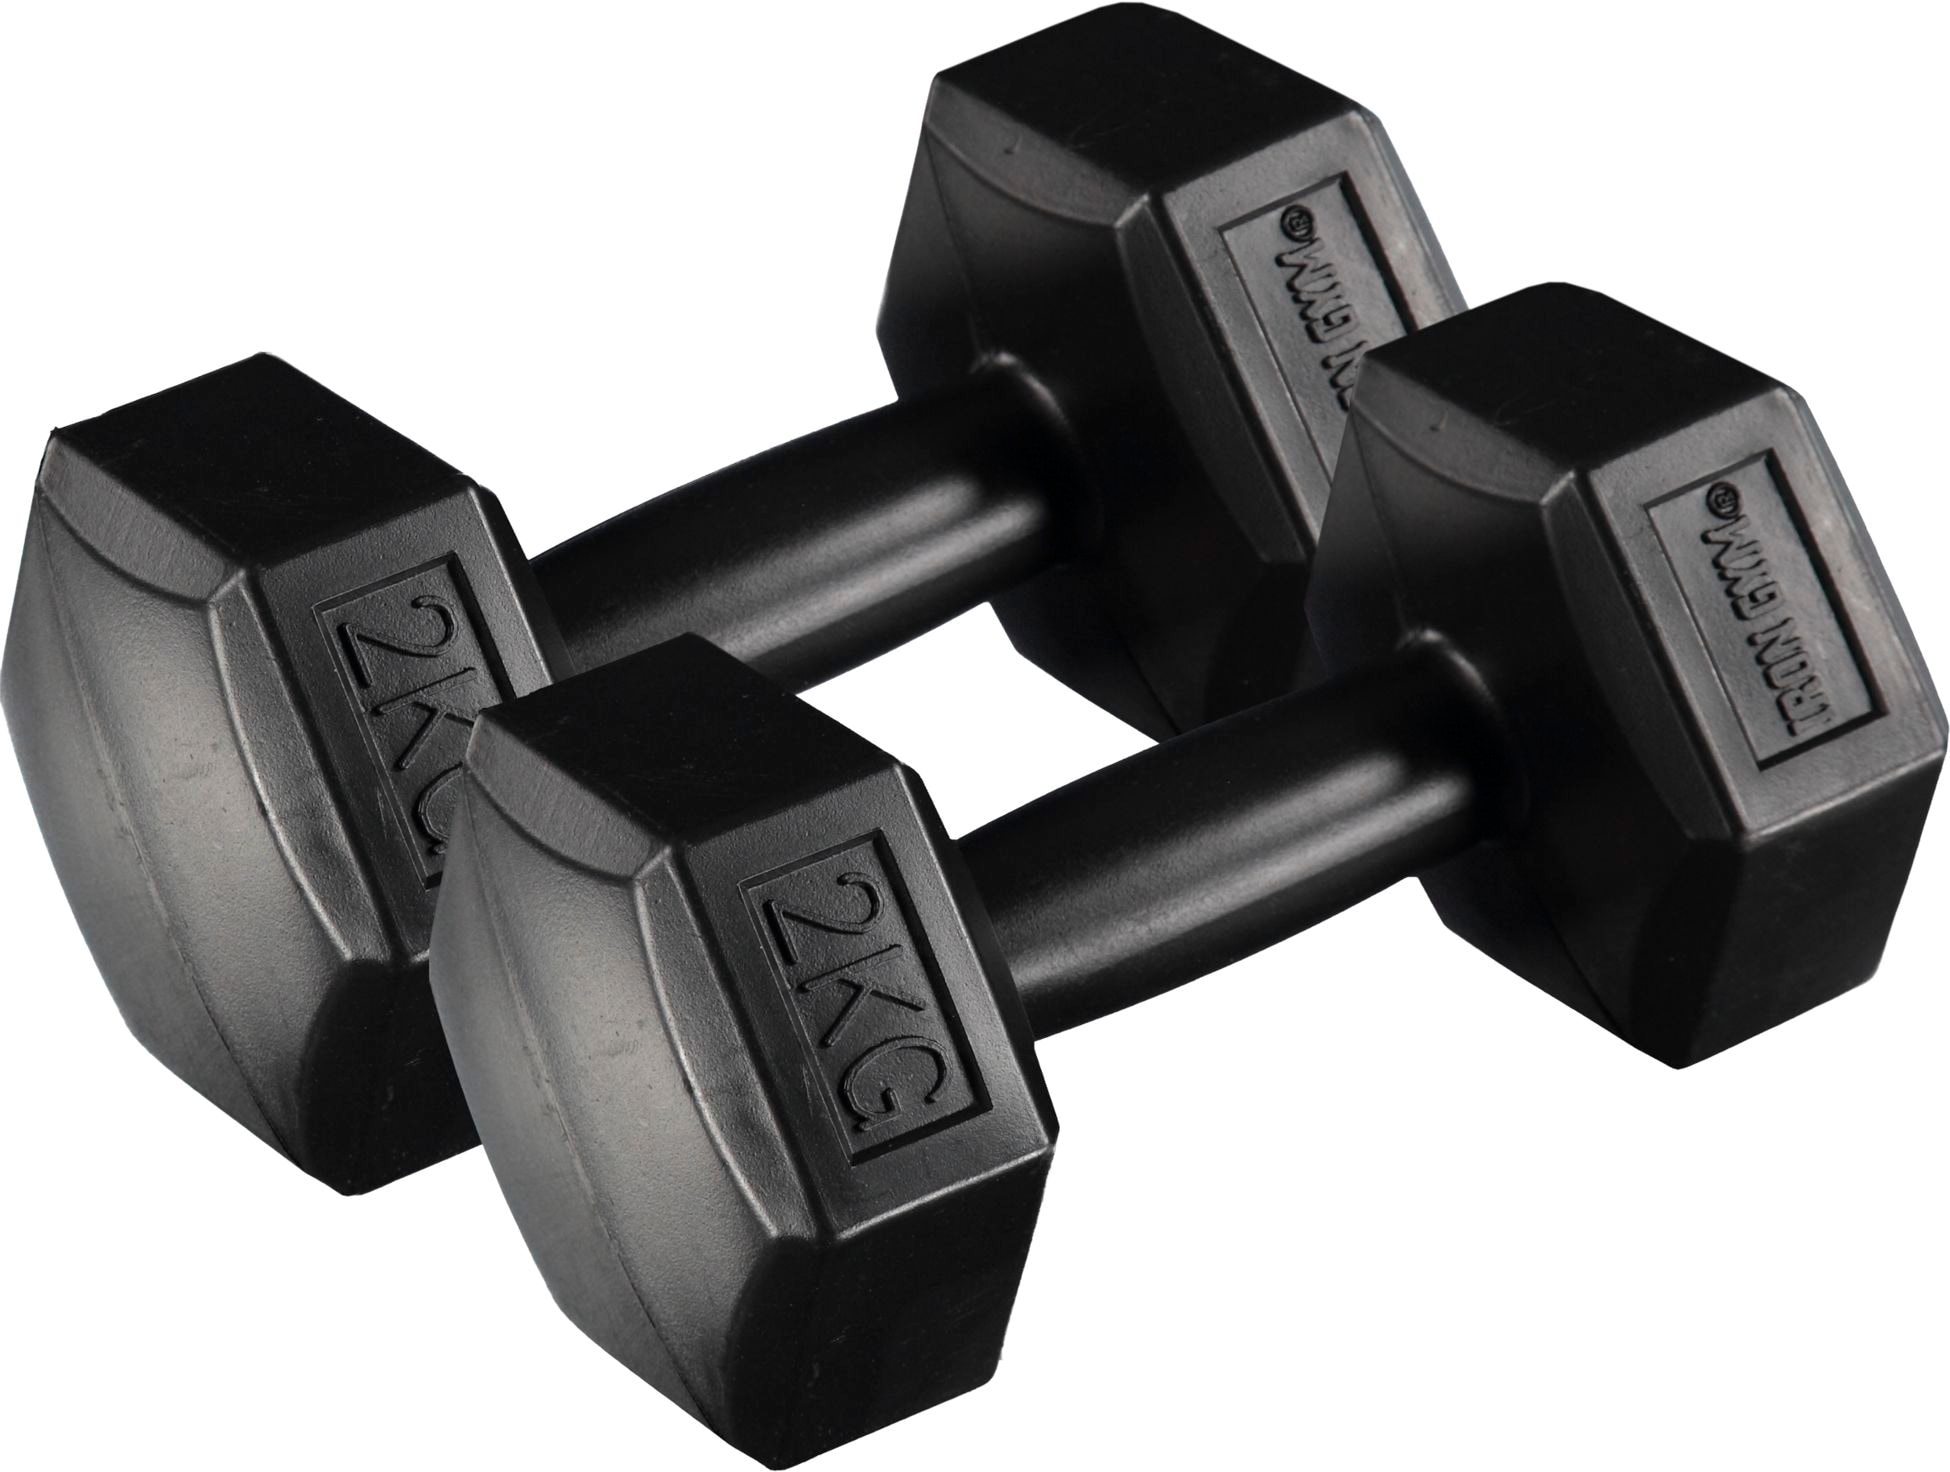 IRON GYM, FIXED HEX DUMBBELL 2KG PAIR